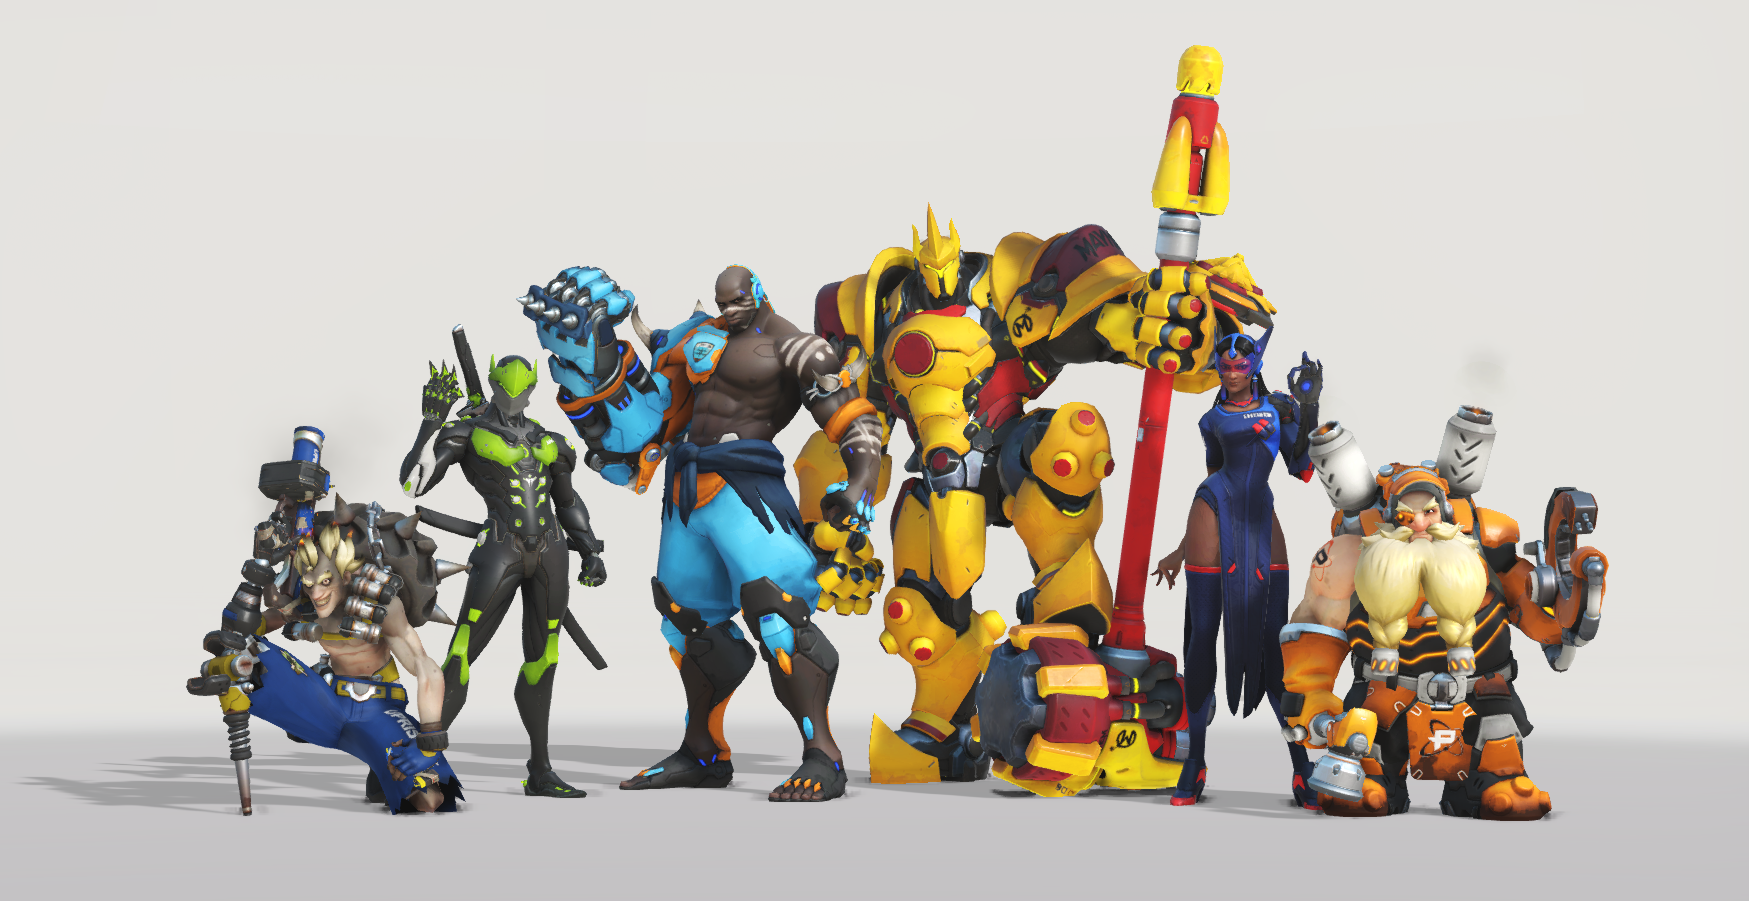 free overwatch league tokens 2019